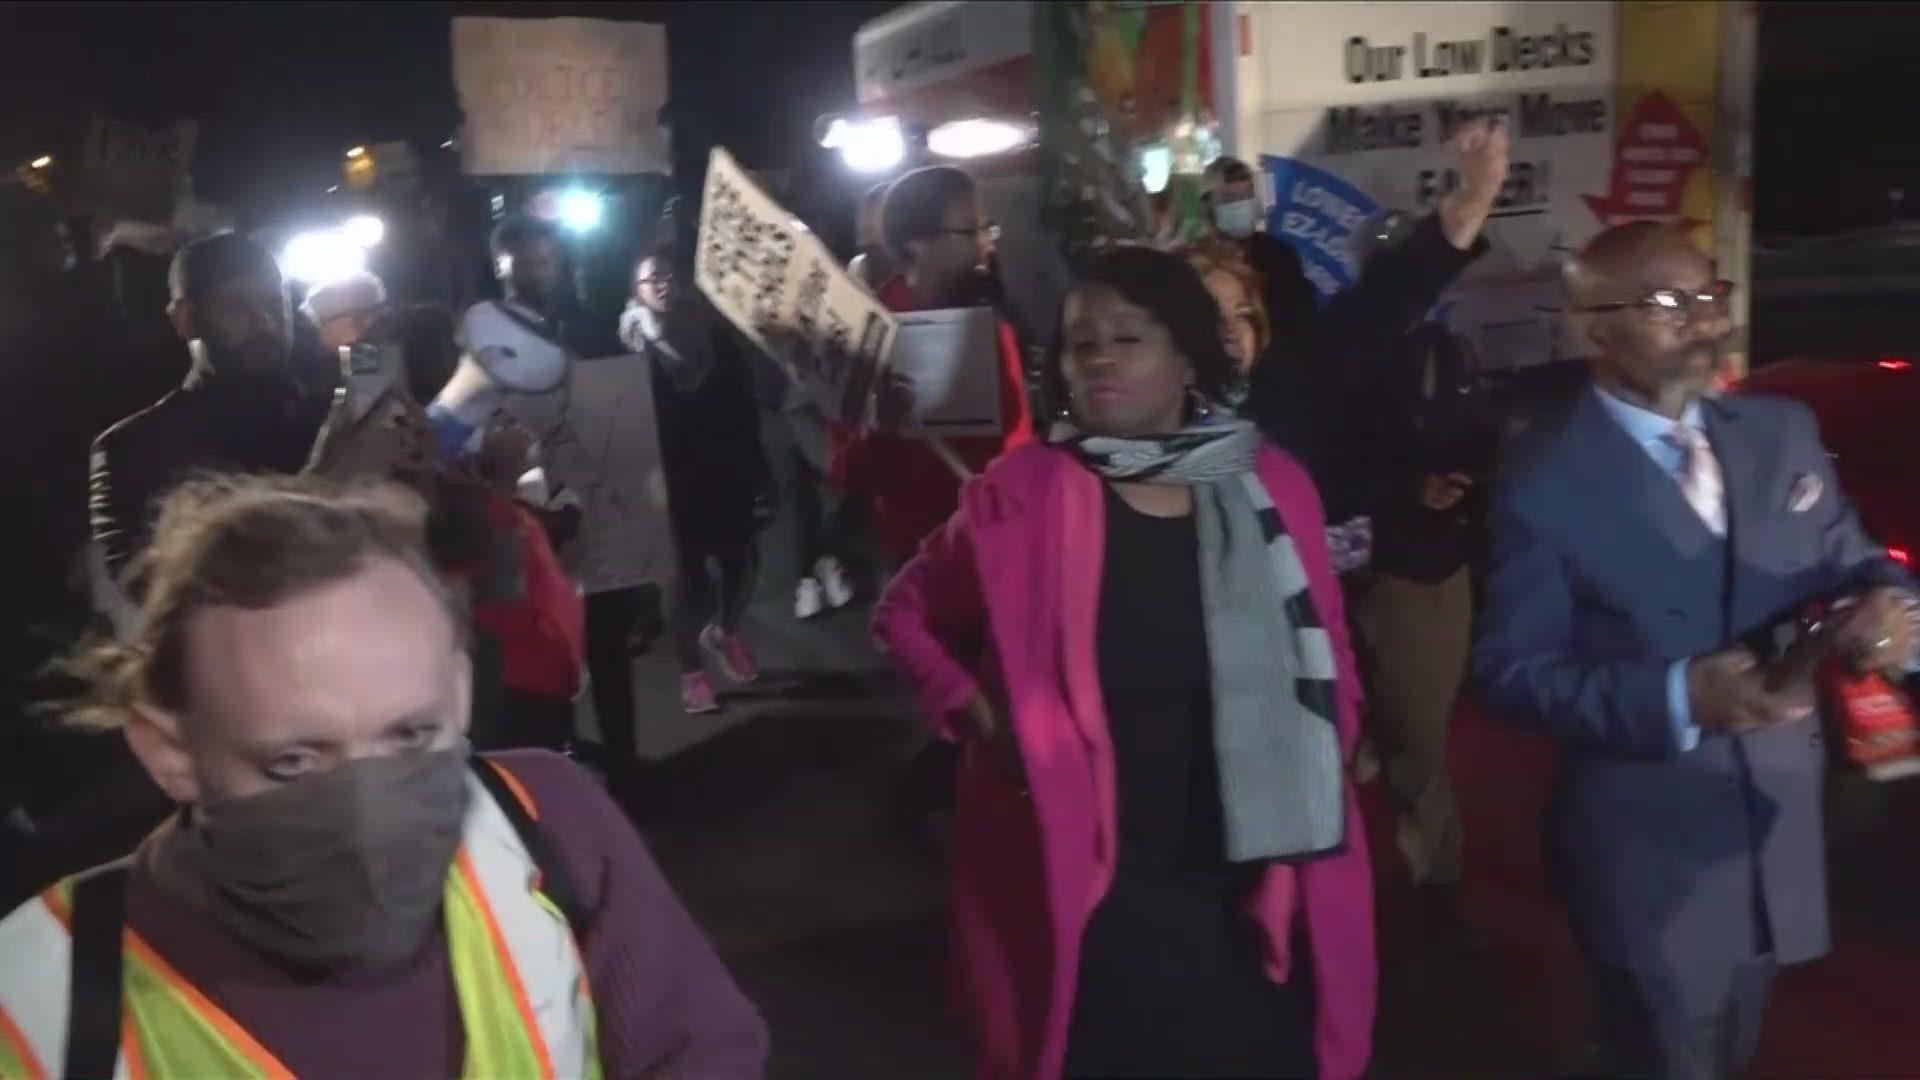 The video was released on Friday evening, and protesters immediately took to the streets.